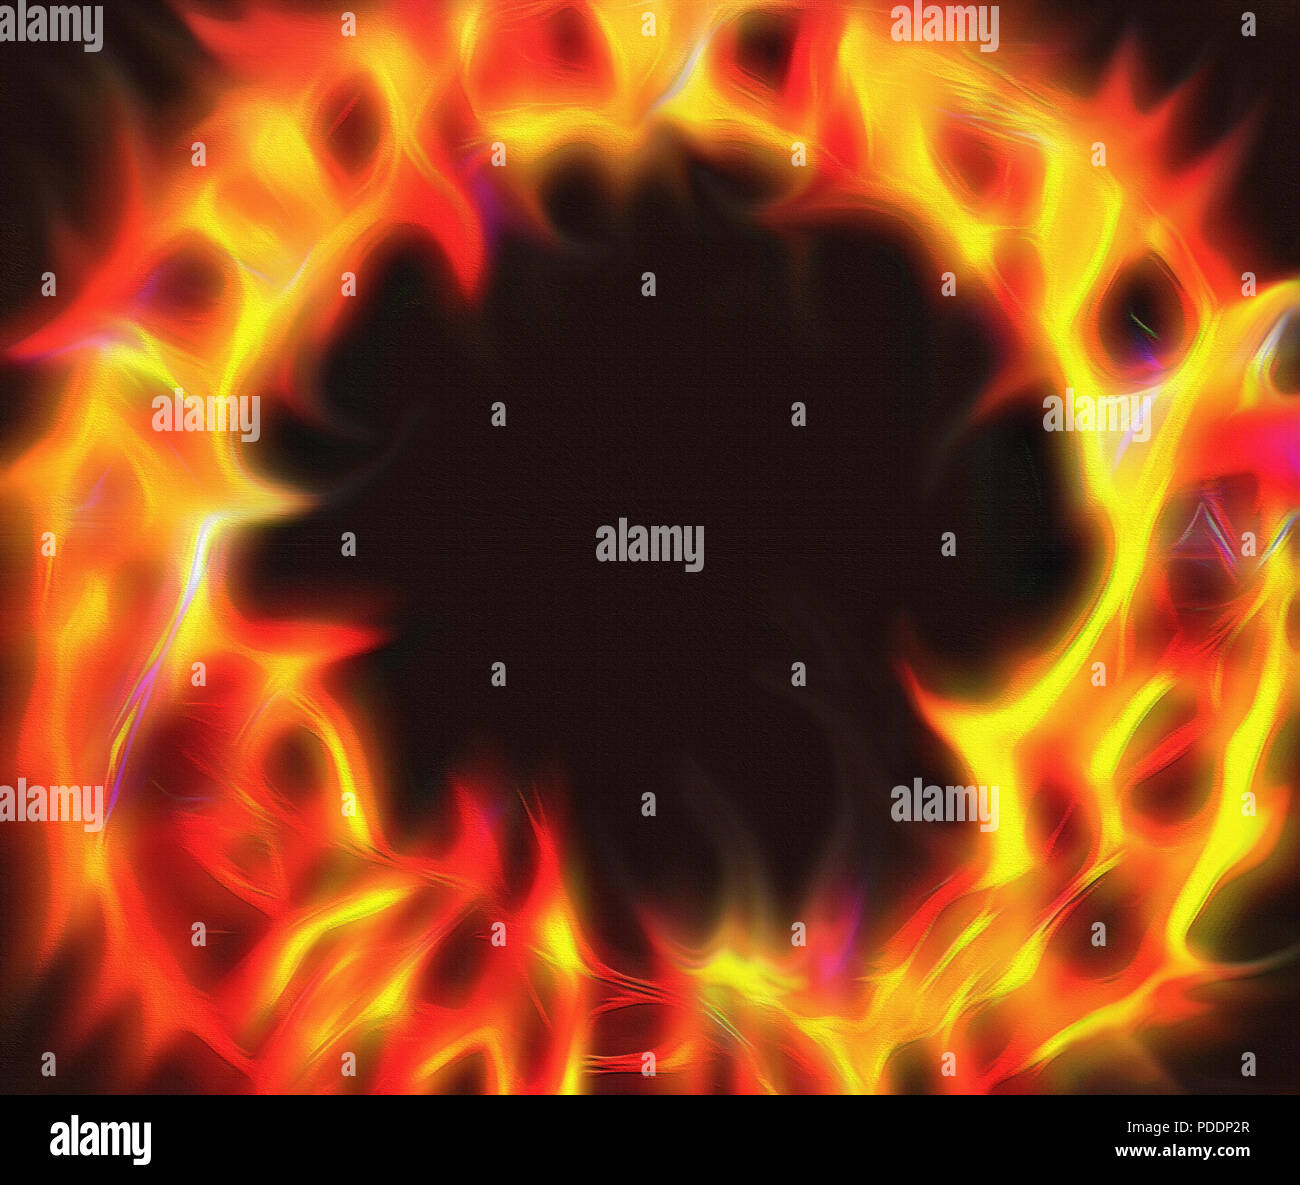 A digital abstract artwork depicting flames and a ring of fire. The color contrast from byellow to red, with deep texturing and firey shapes make an i Stock Photo